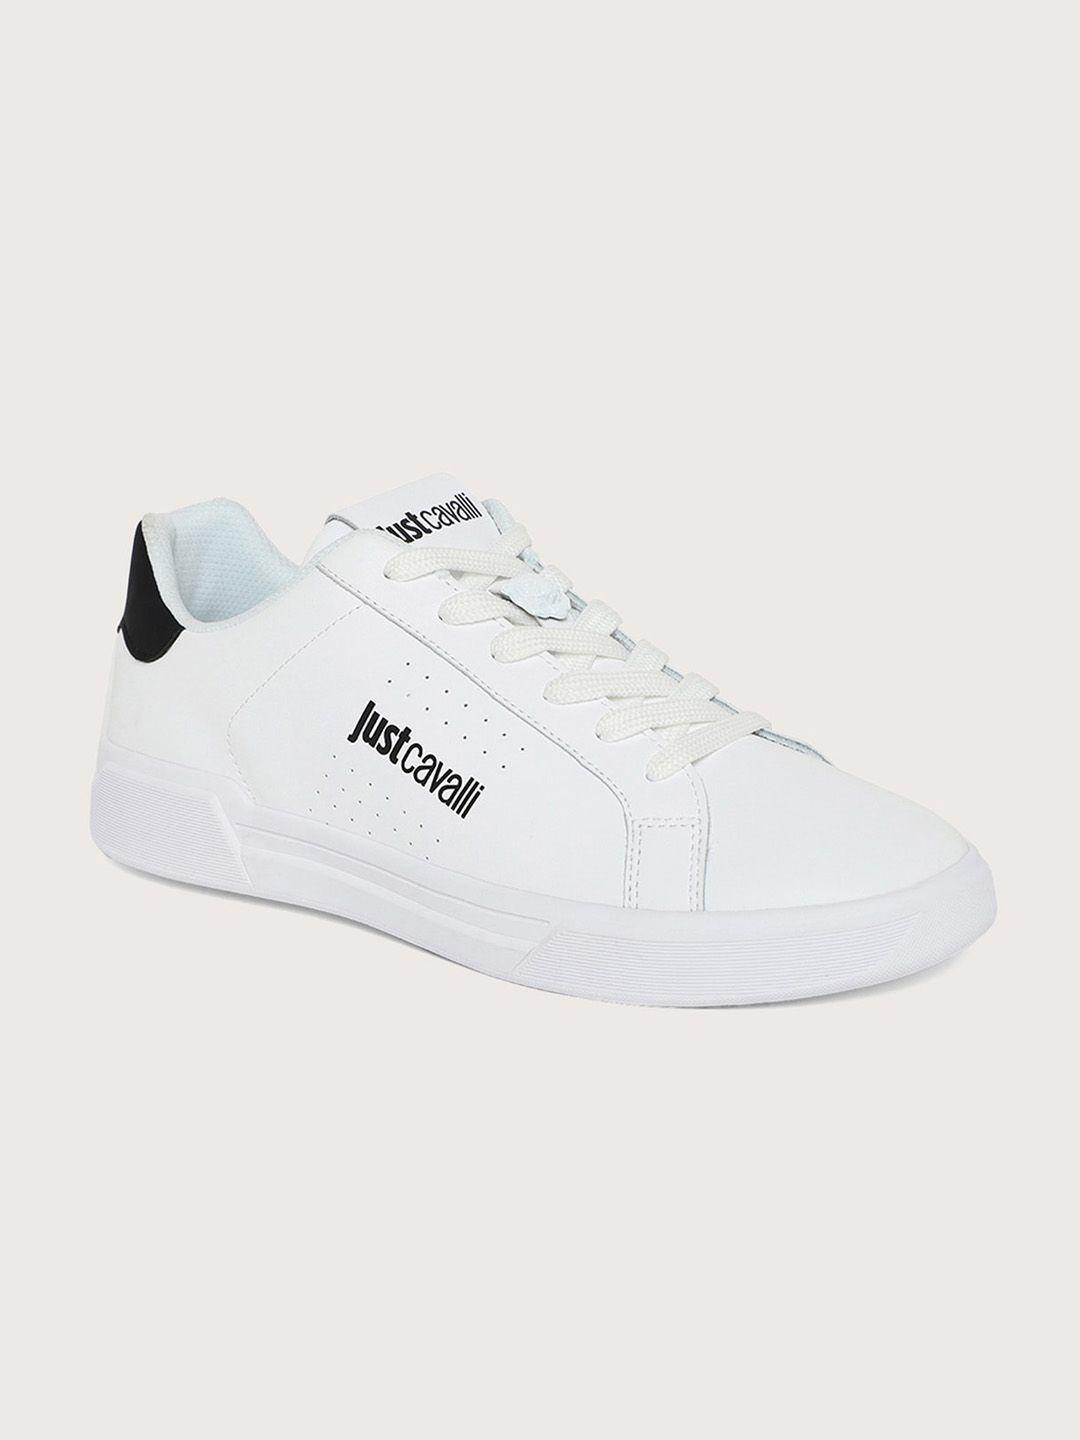 just cavalli men lace-up sneakers